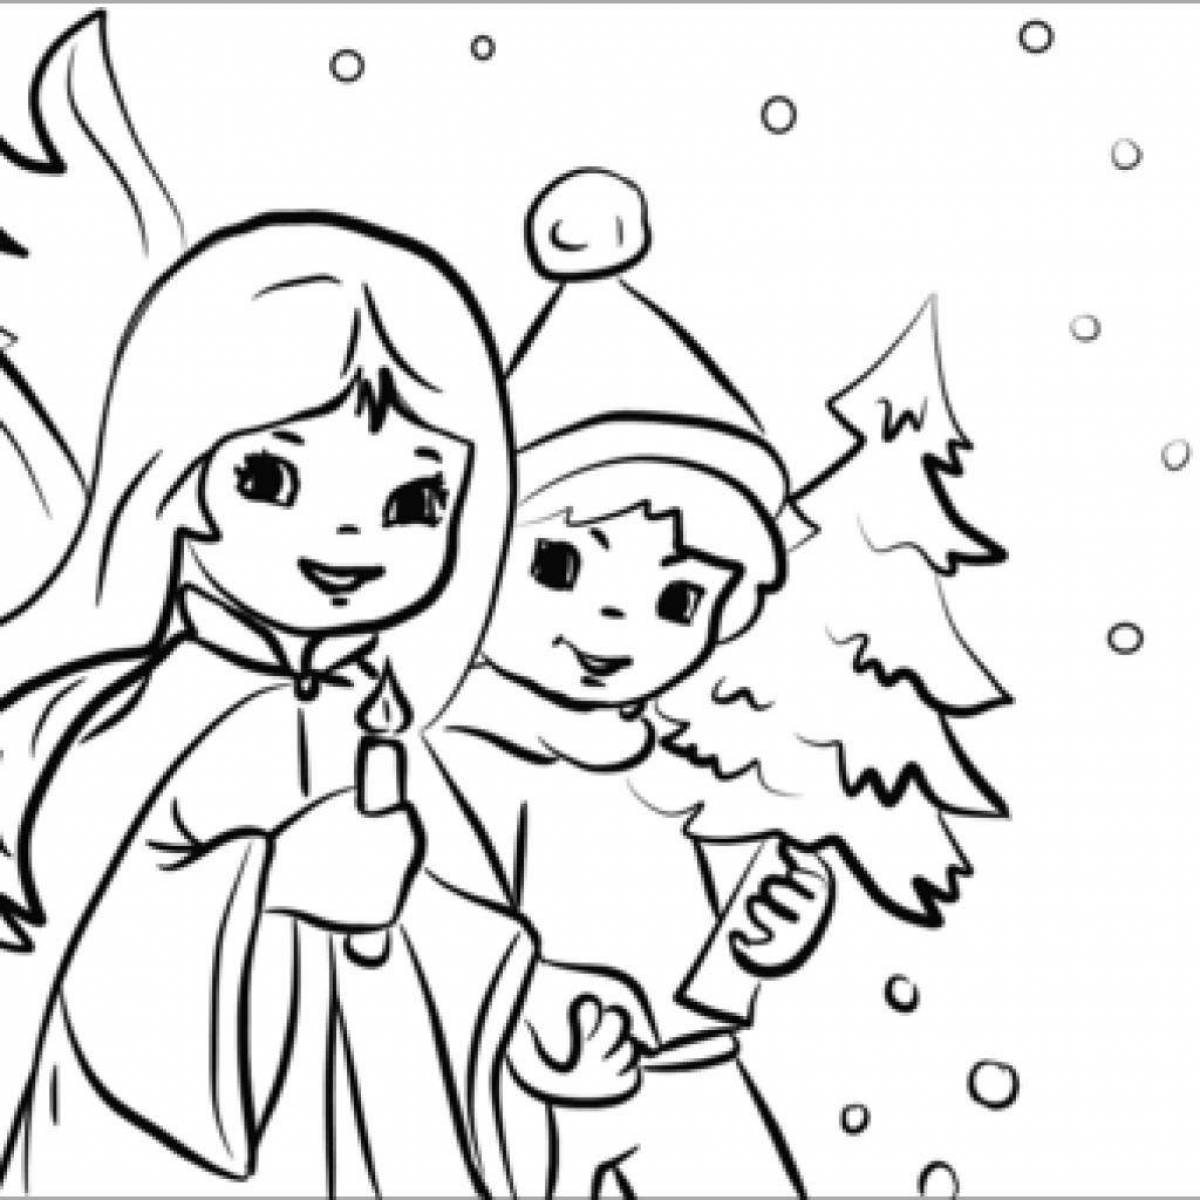 Merry Christmas baby coloring page